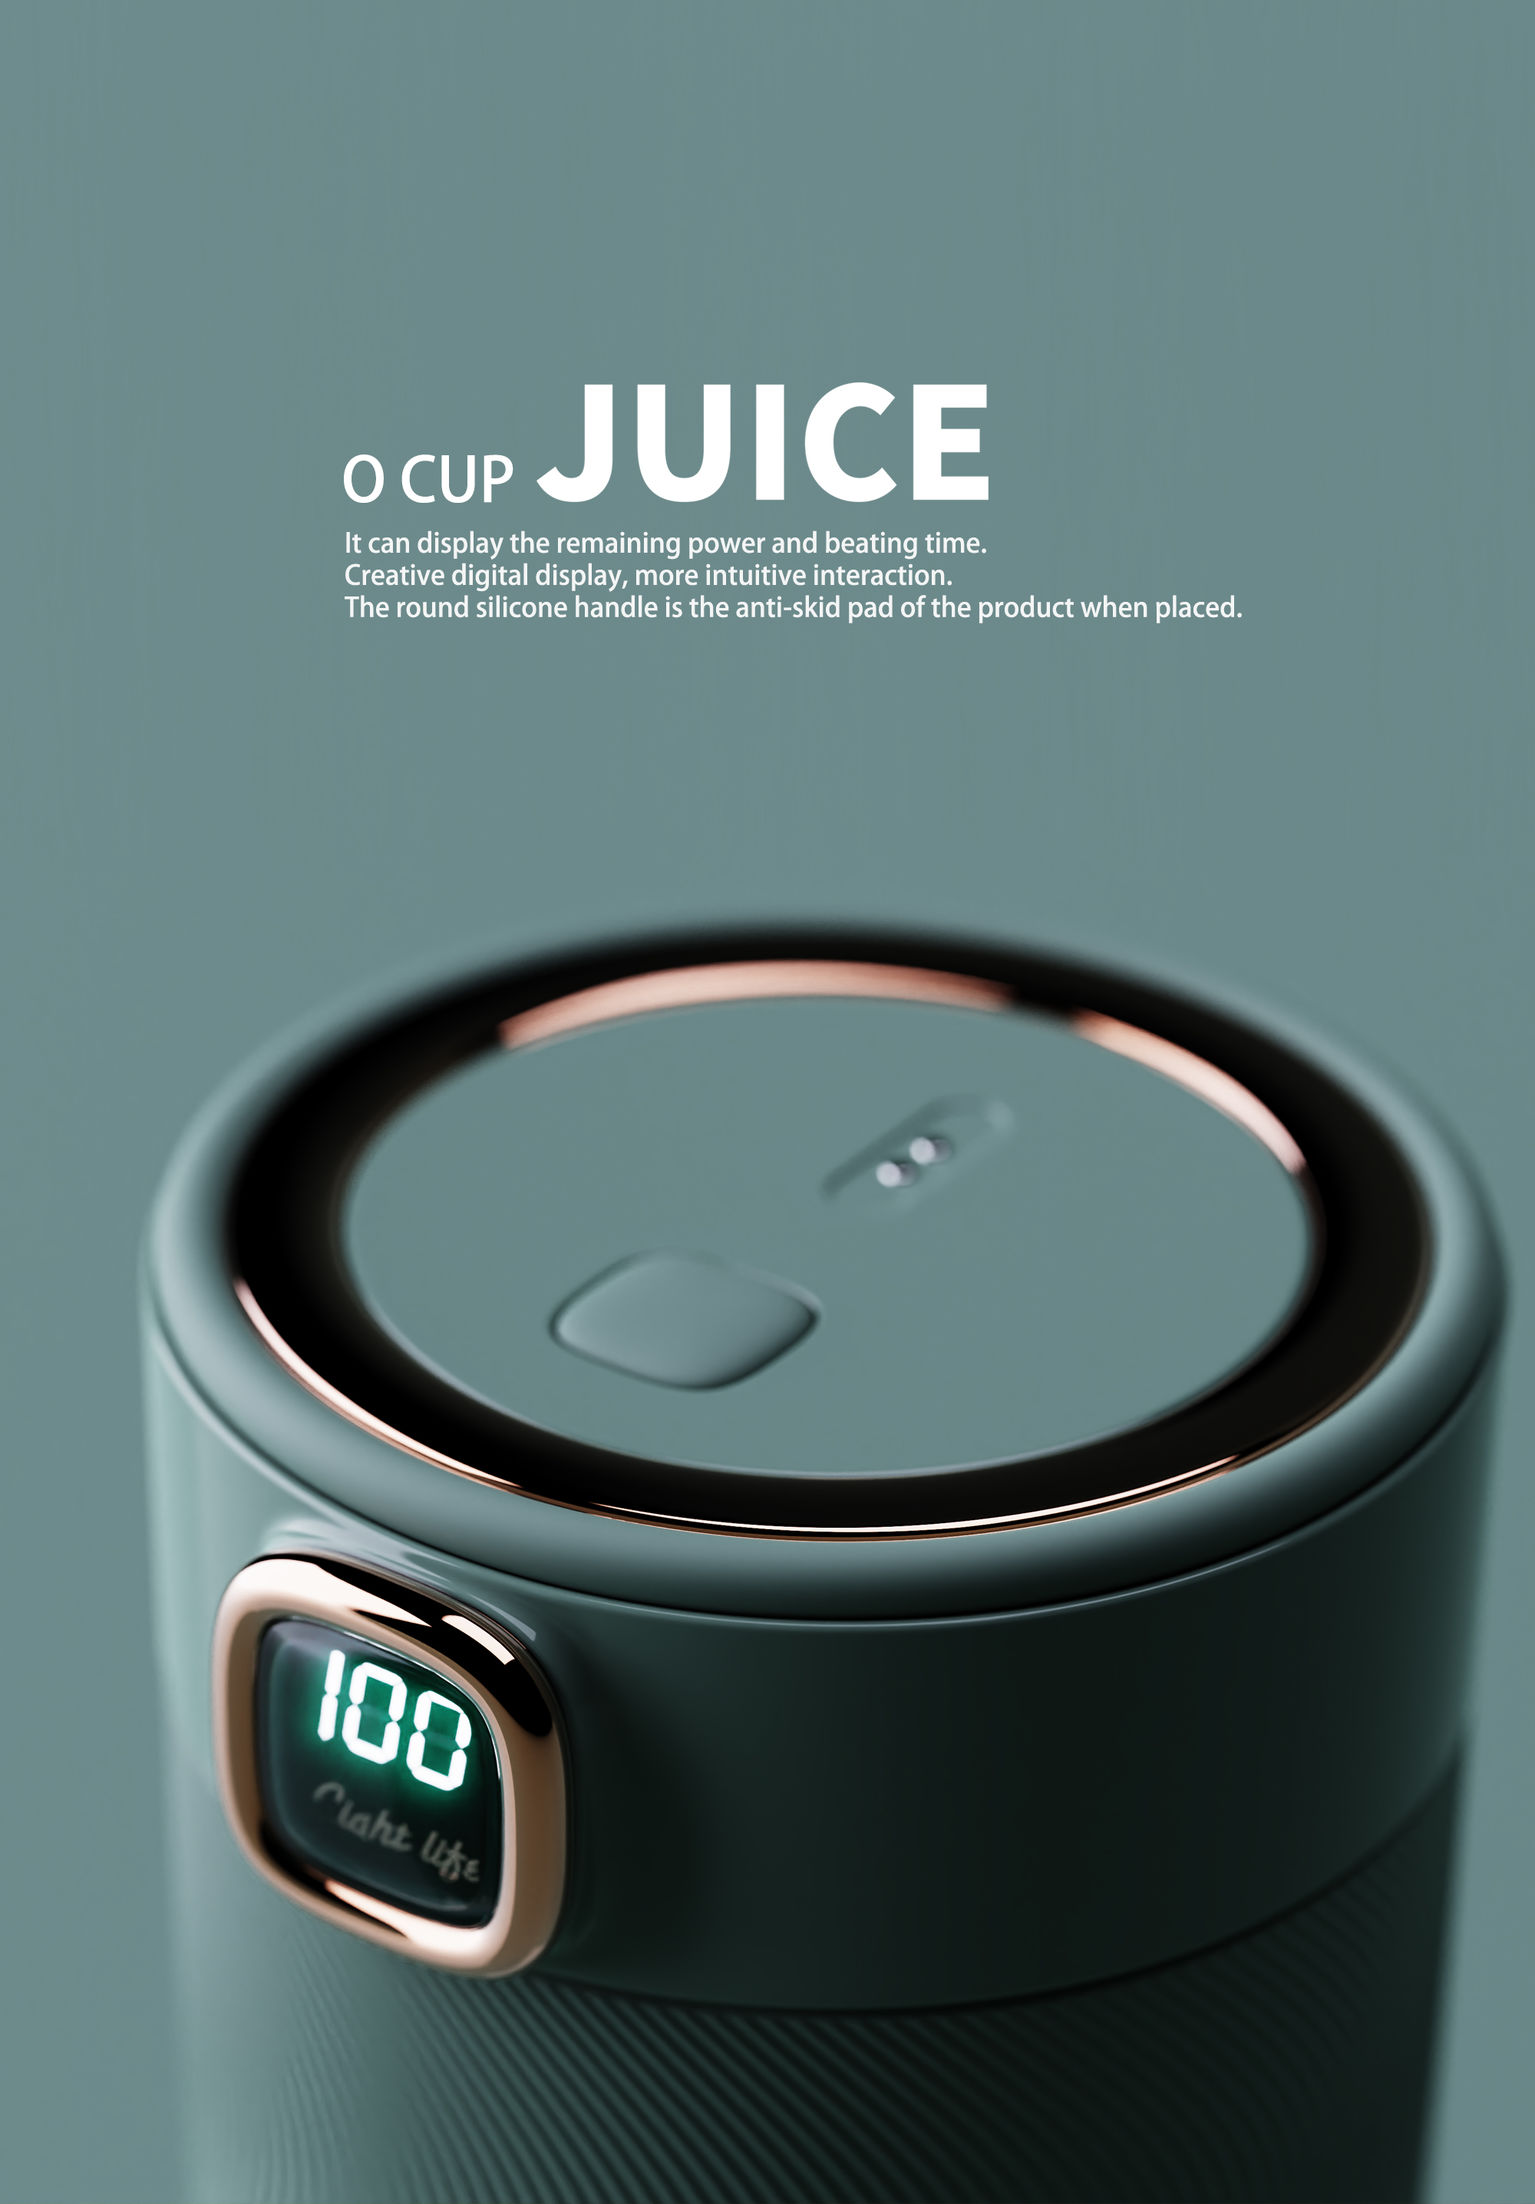 ”O CUP“ Juicer